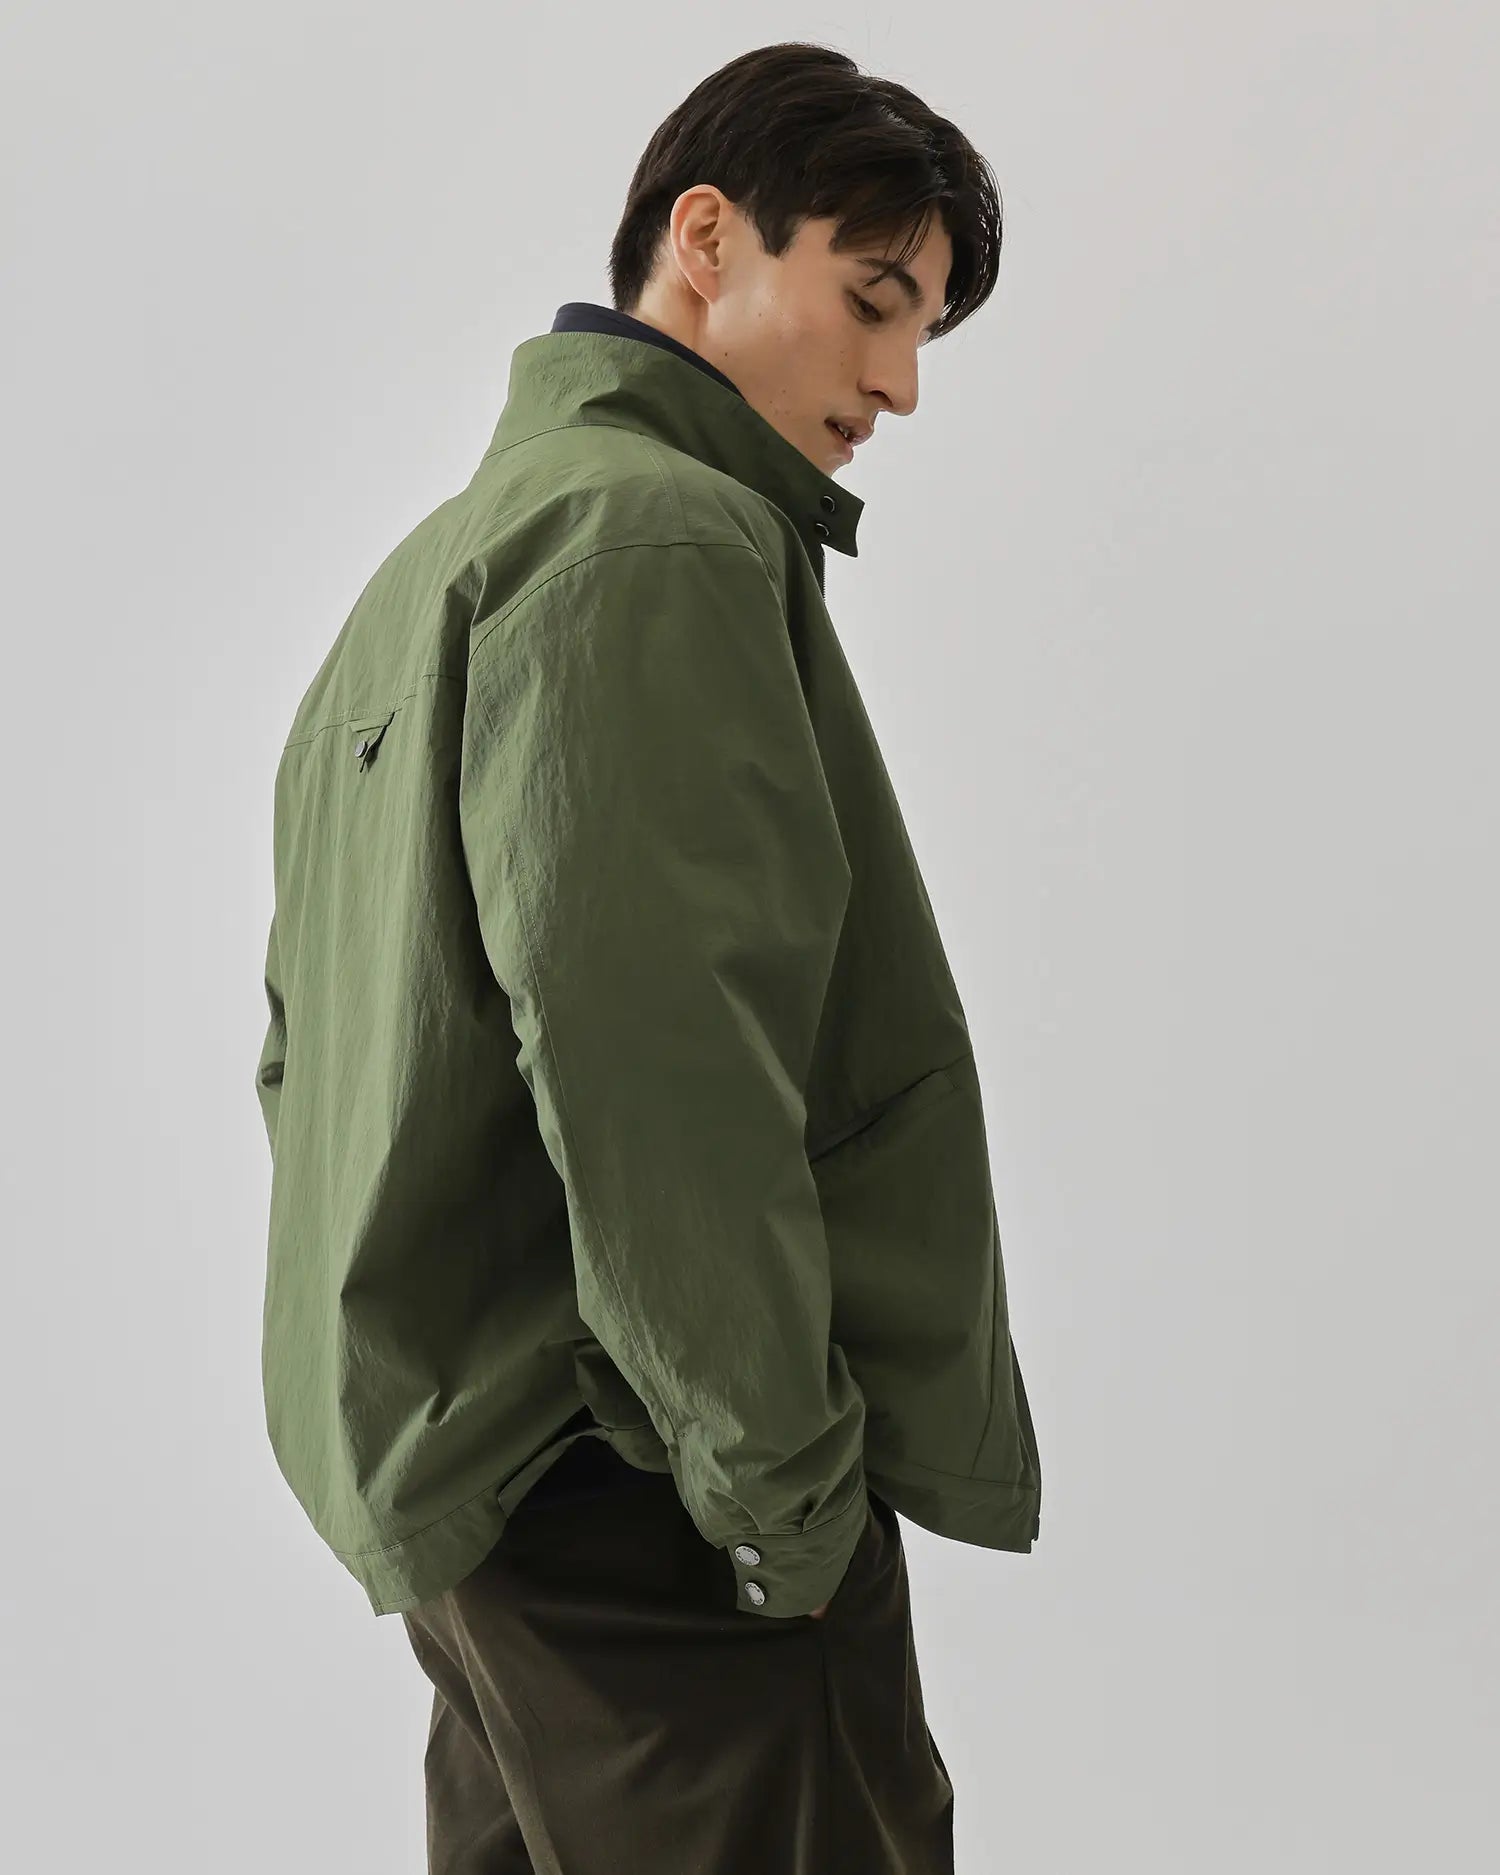 Men's Crew Jacket in Military Green 05 #military-green